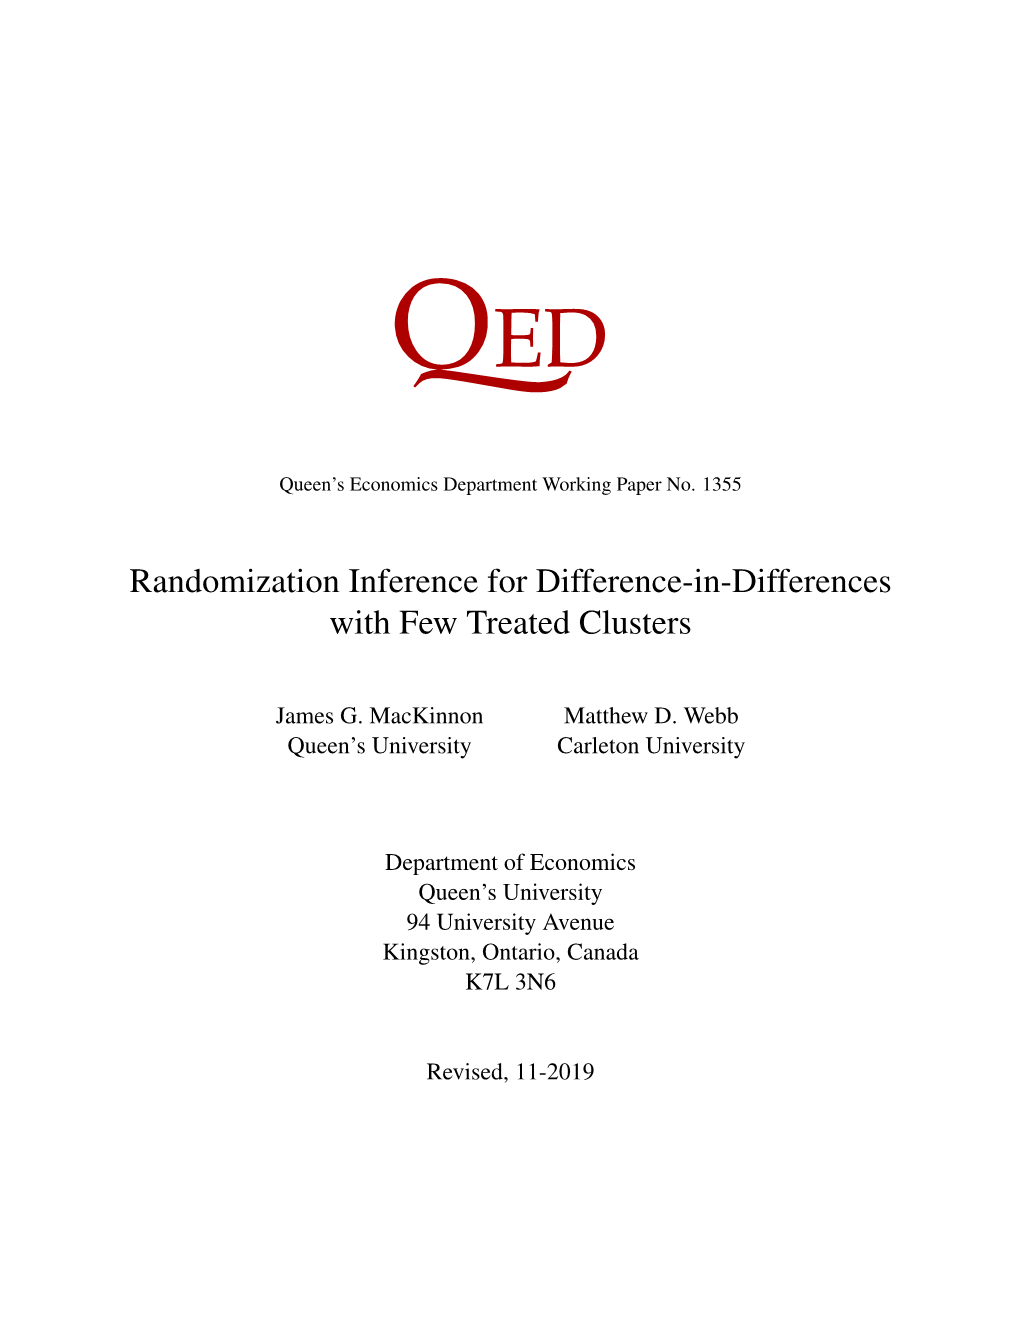 Randomization Inference for Difference-In-Differences with Few Treated Clusters